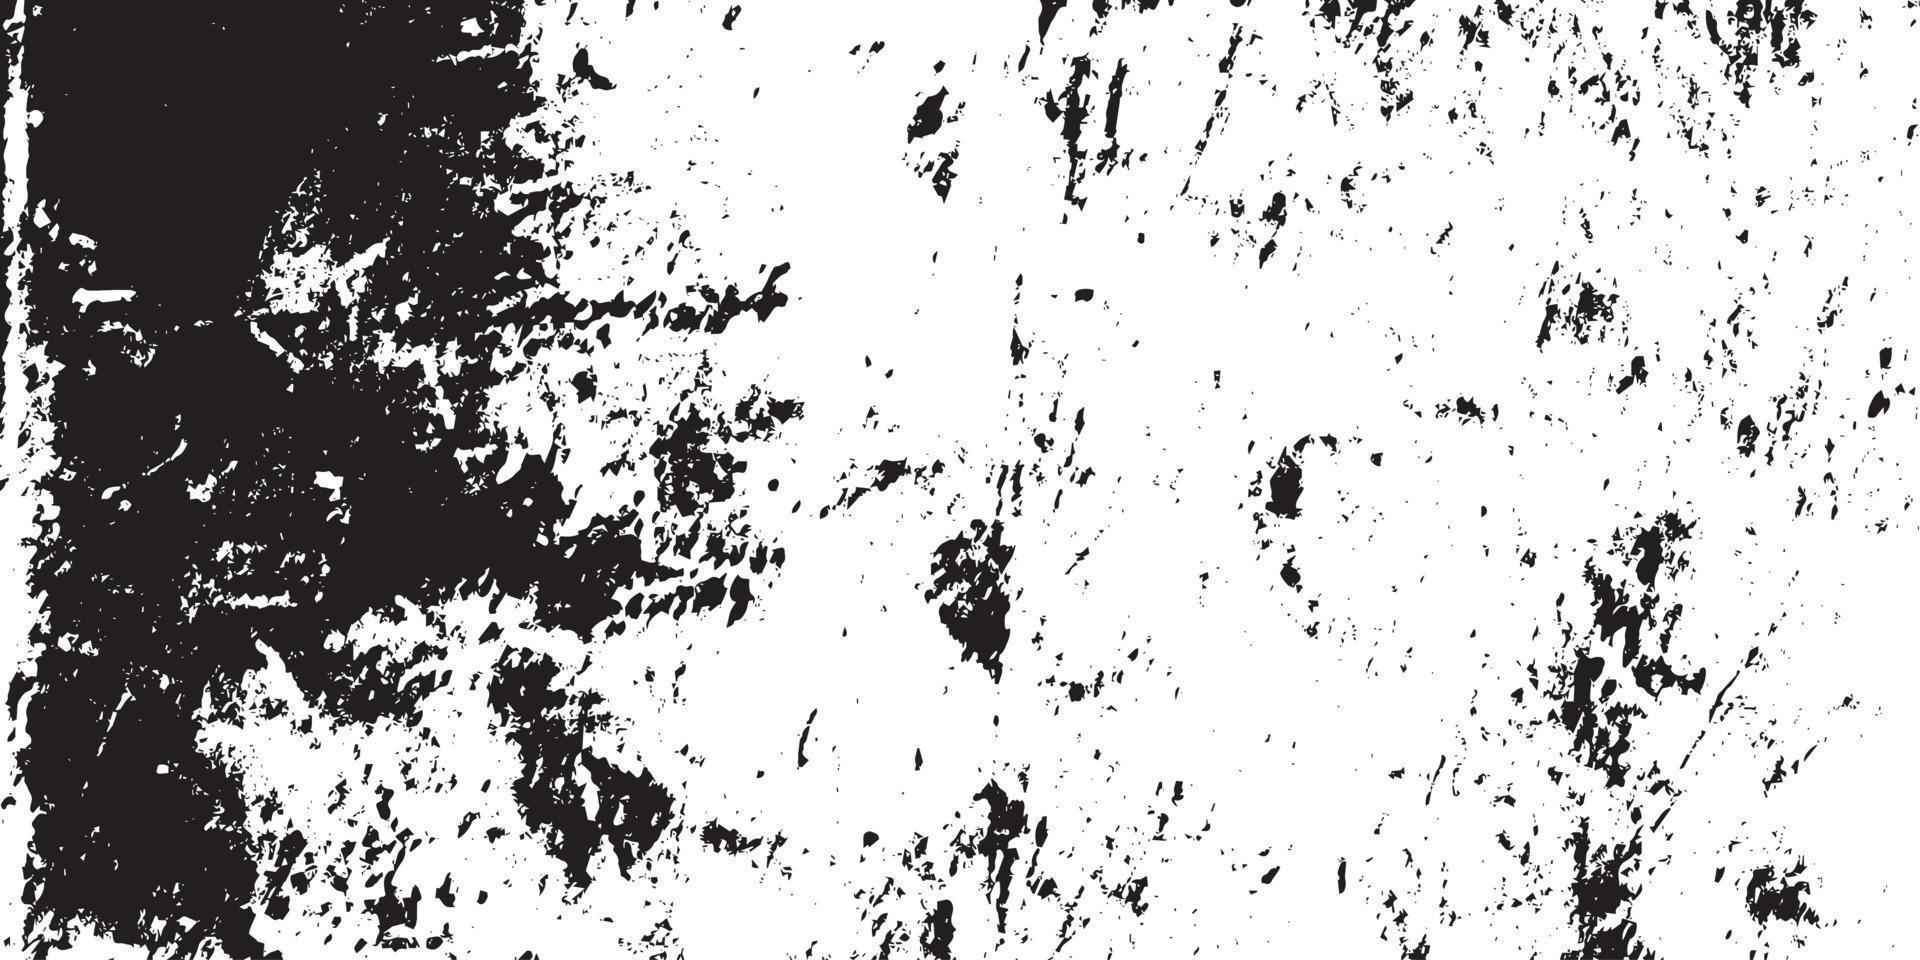 Grunge texture effect. Distressed overlay rough textured. Abstract vintage monochrome. Black isolated on white background. Graphic design element halftone style concept for banner, flyer, poster vector